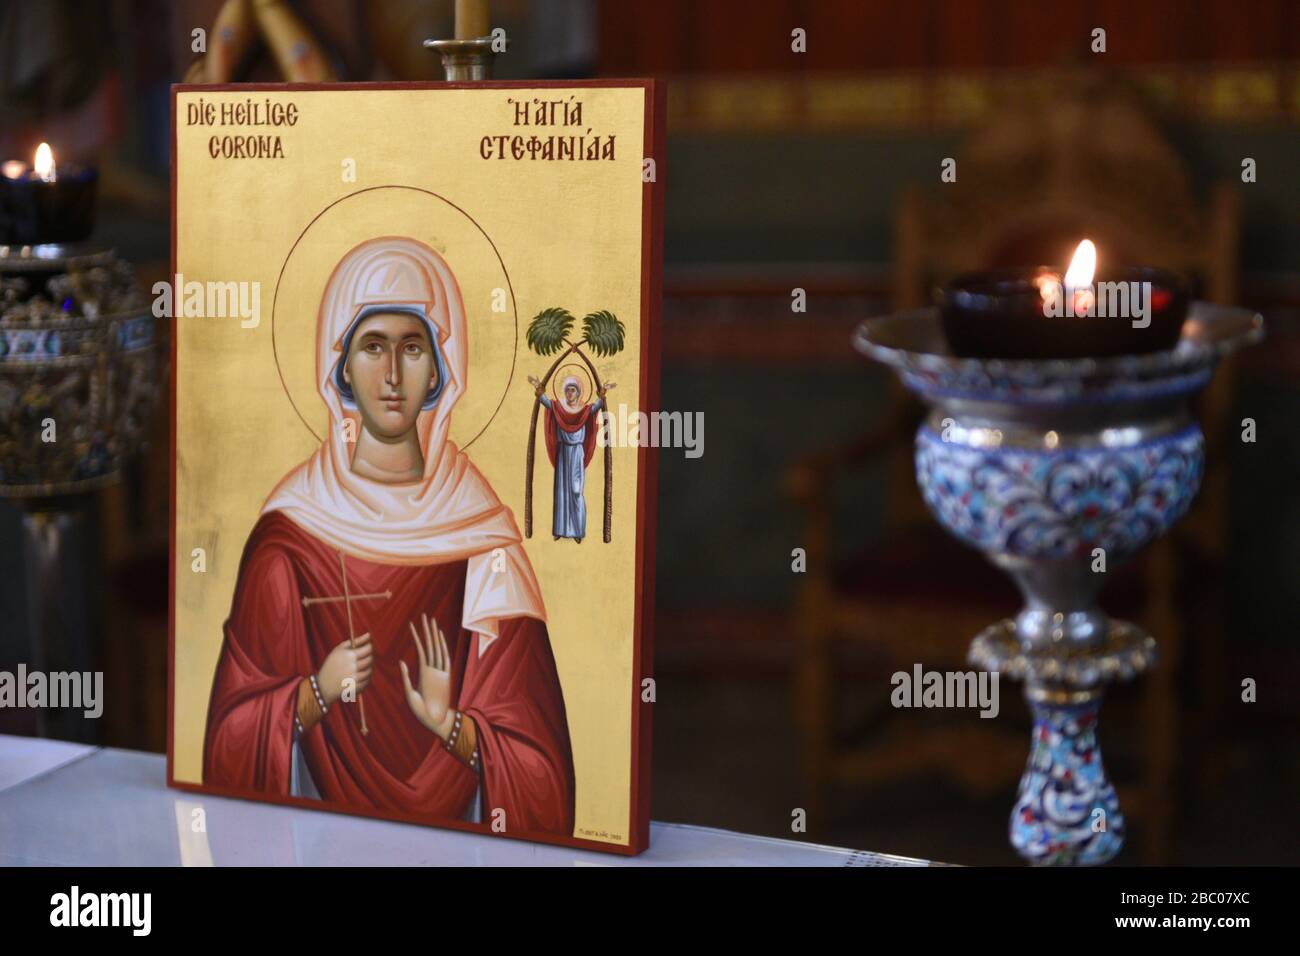 For 40 days the just made icon of St. Corona will be kept for consecration on the altar of the Greek Orthodox Church of All Saints at Ungererstraße 131. The saint nourishes the hope for help in the raging Corona pandemic. [automated translation] Stock Photo